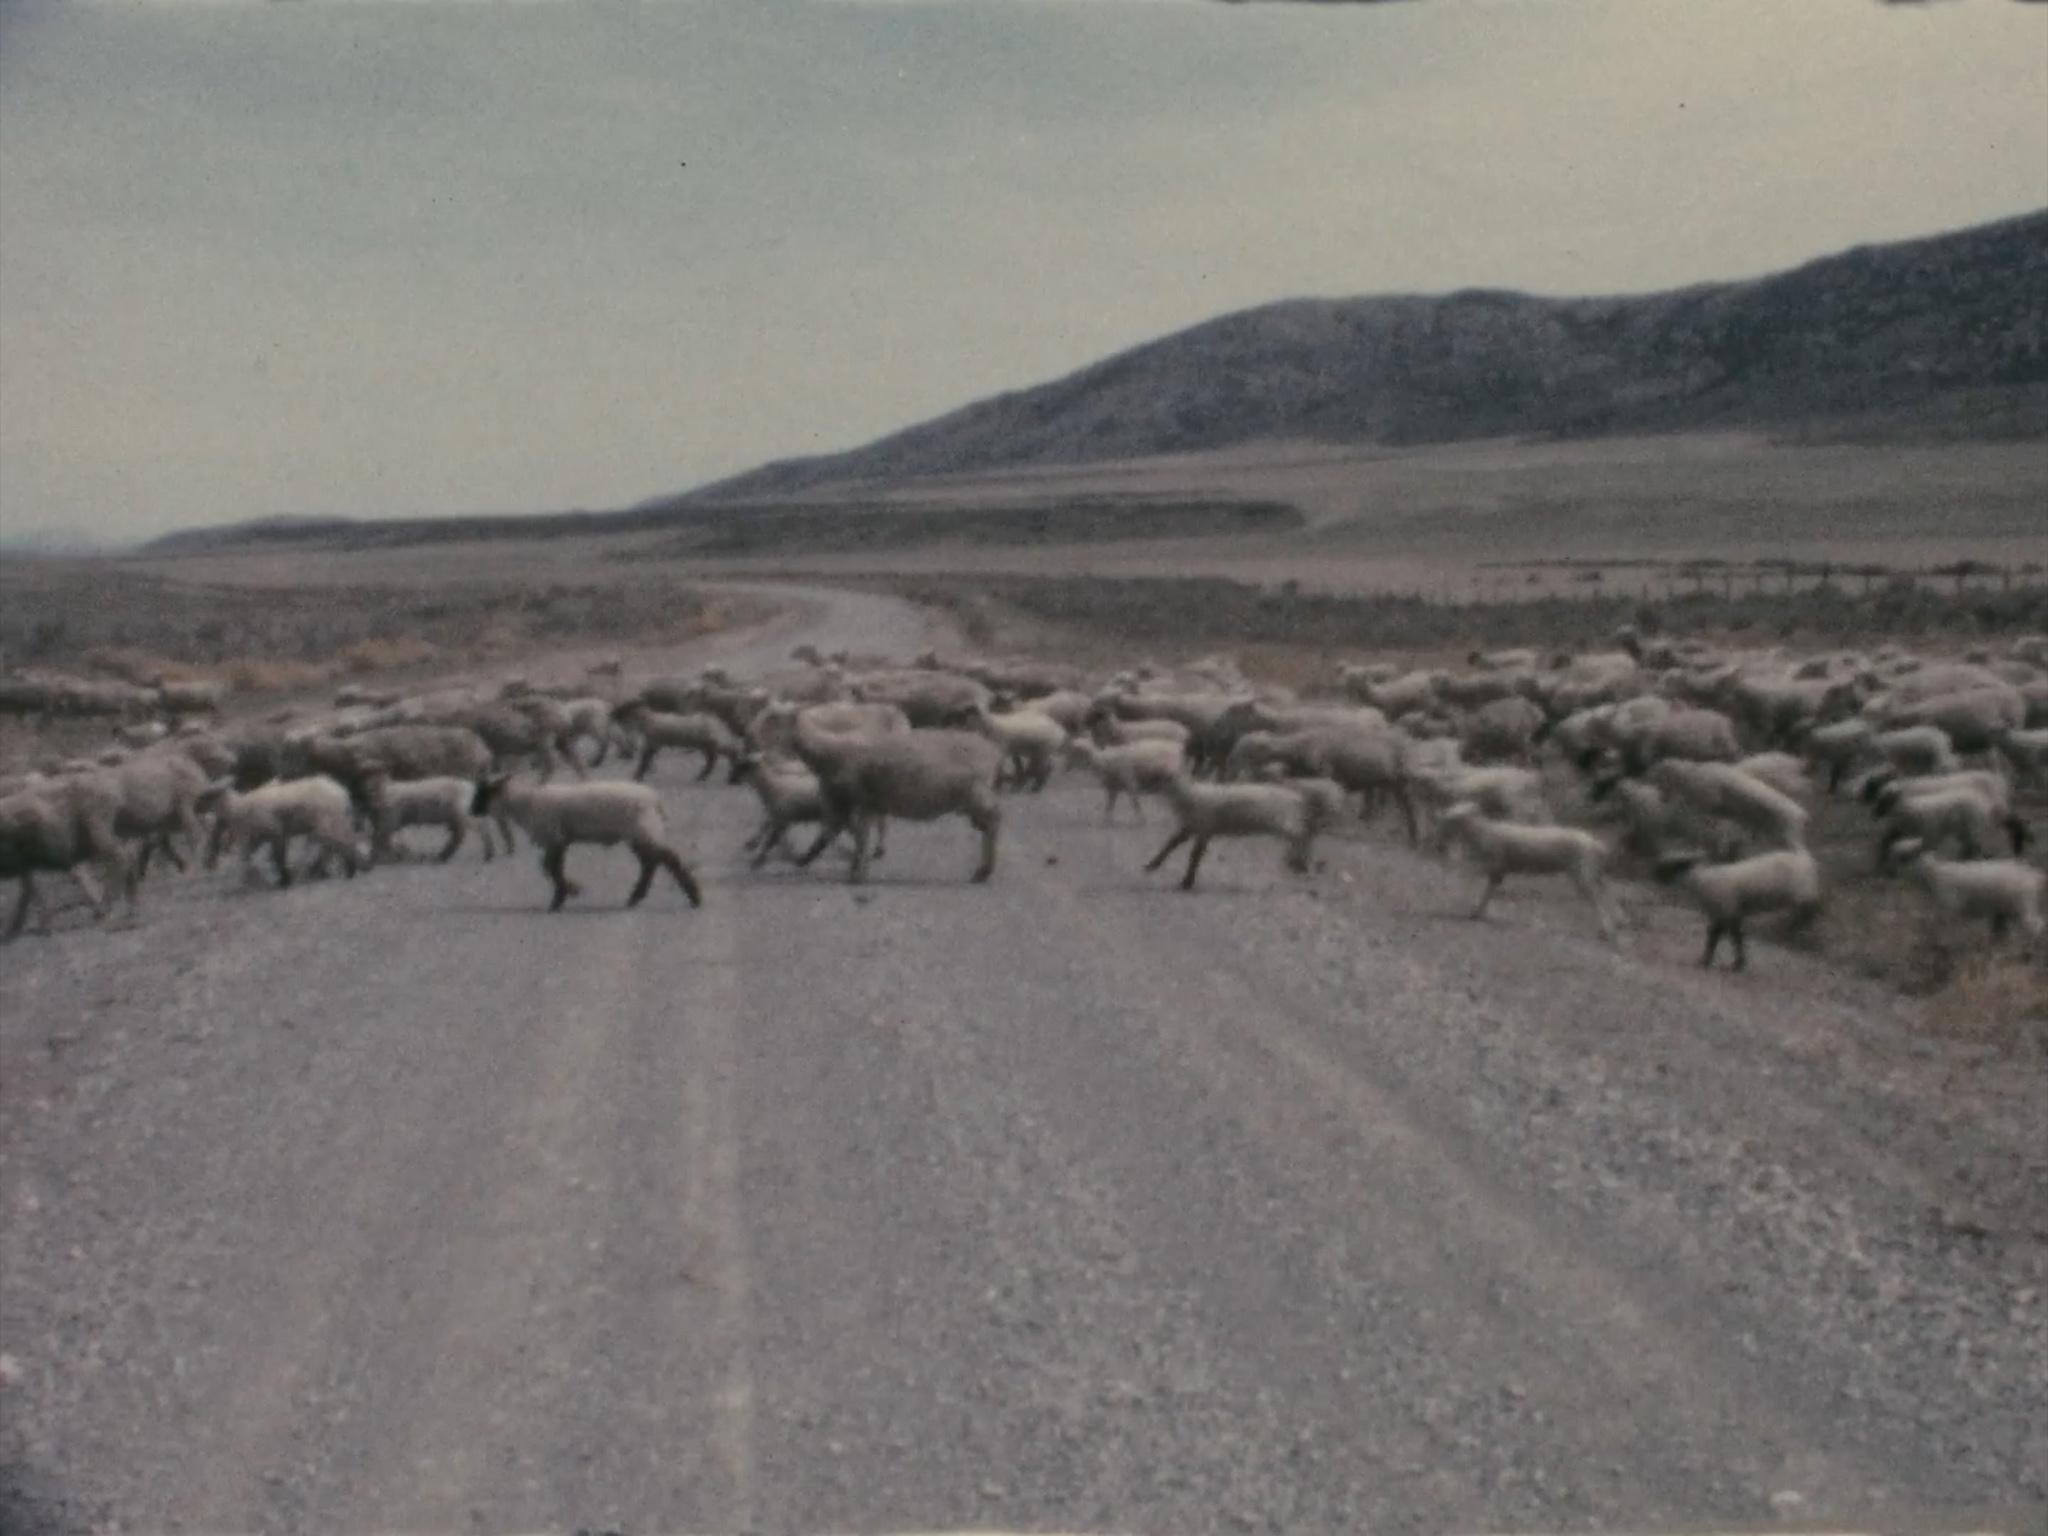 a large flock of sheep crossing a dirt road